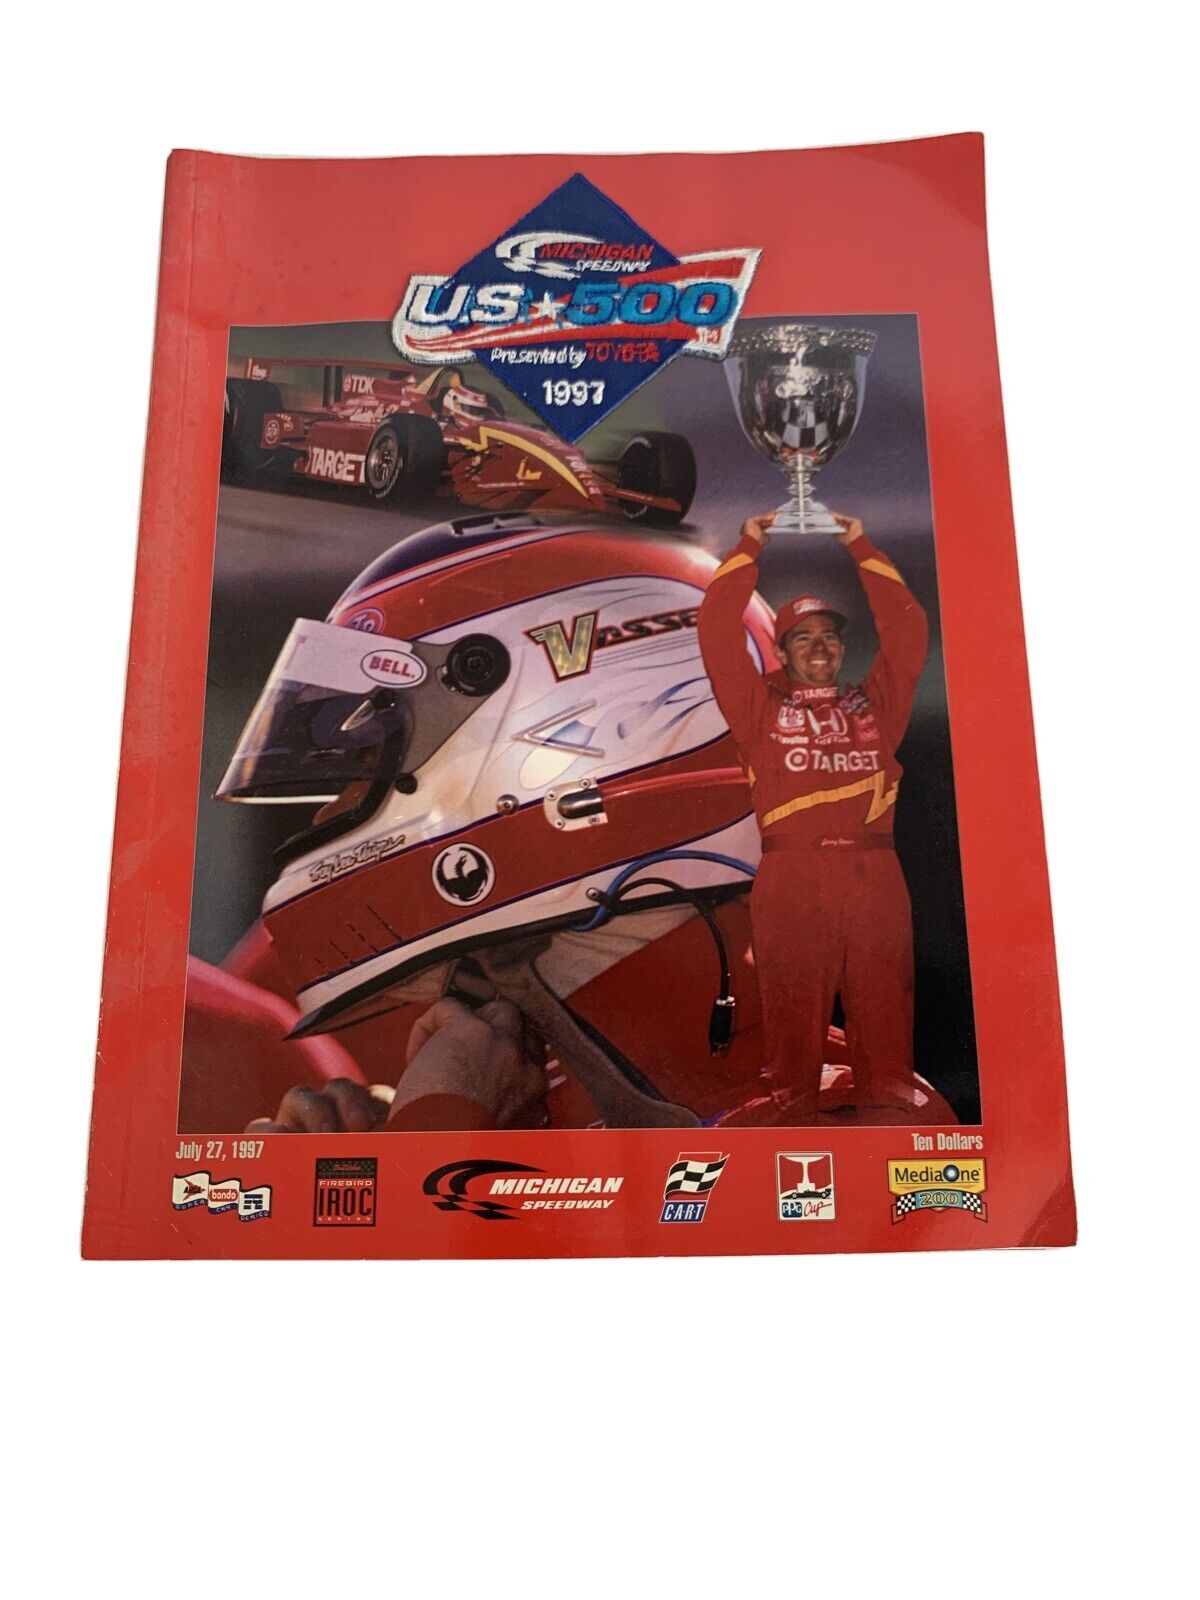 1997 US 500 Toyota at Michigan Speedway Program with Patch